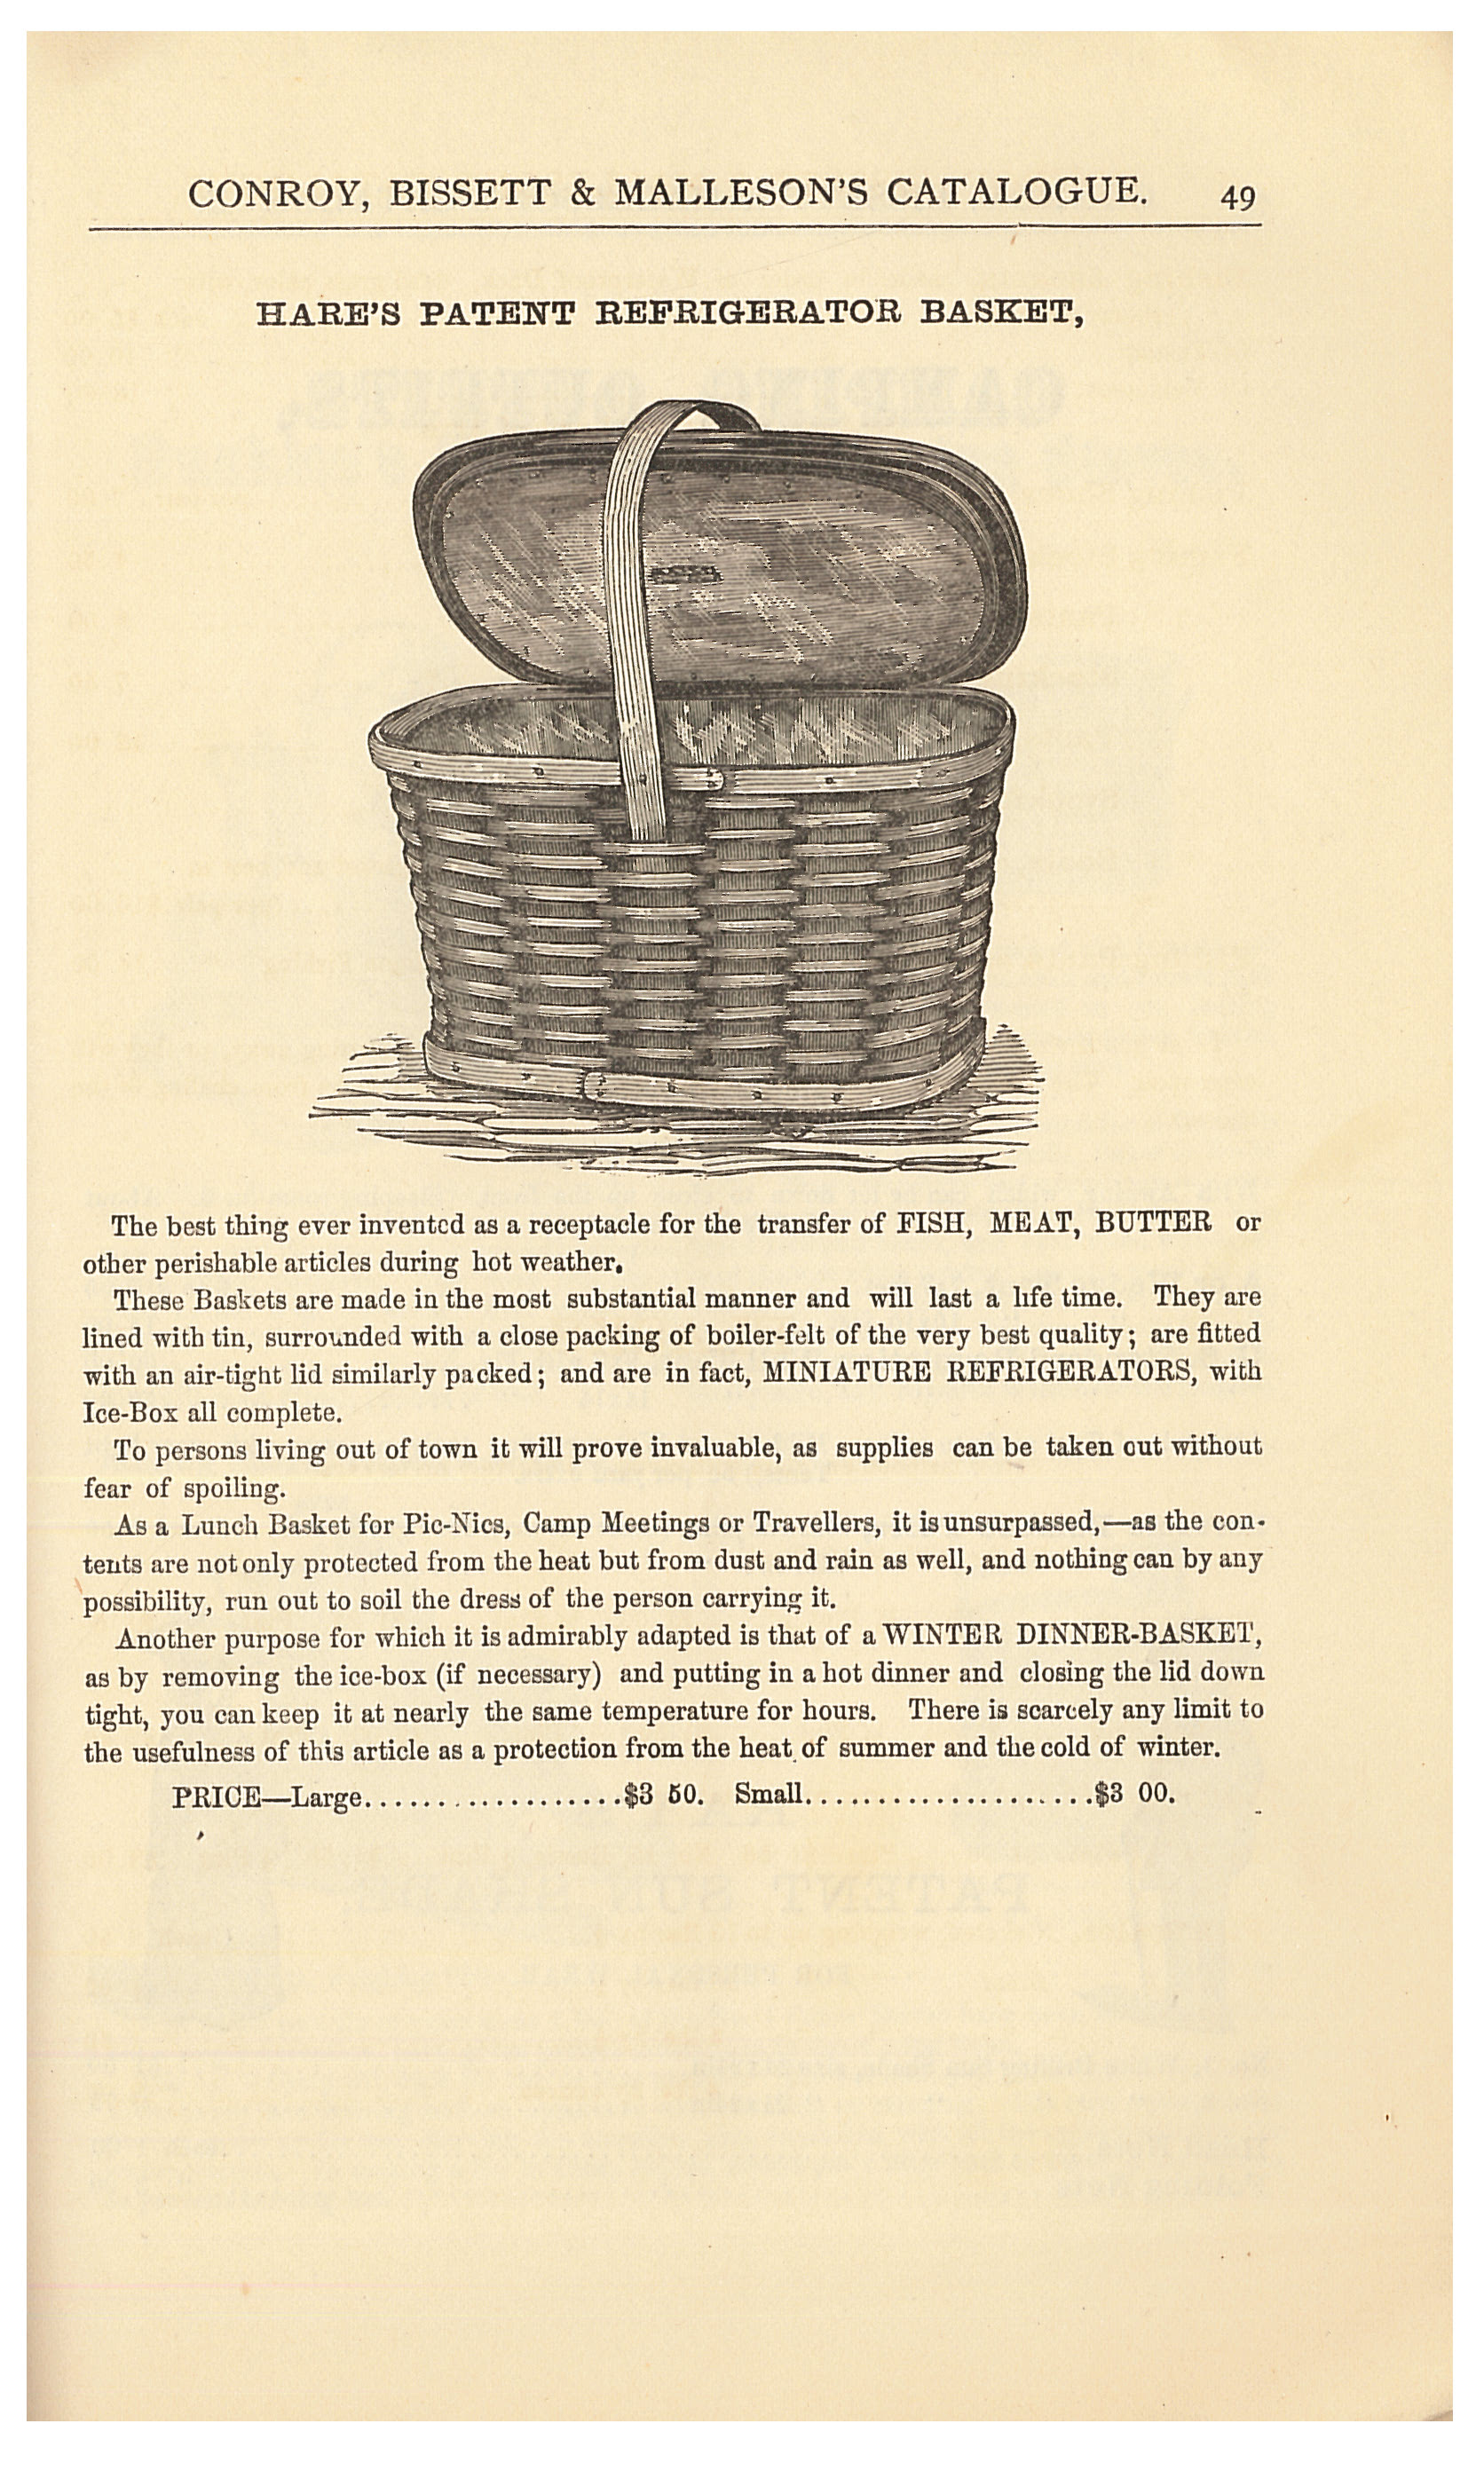 Staying cool for a 19th Century picnic – Smithsonian Libraries and Archives  / Unbound